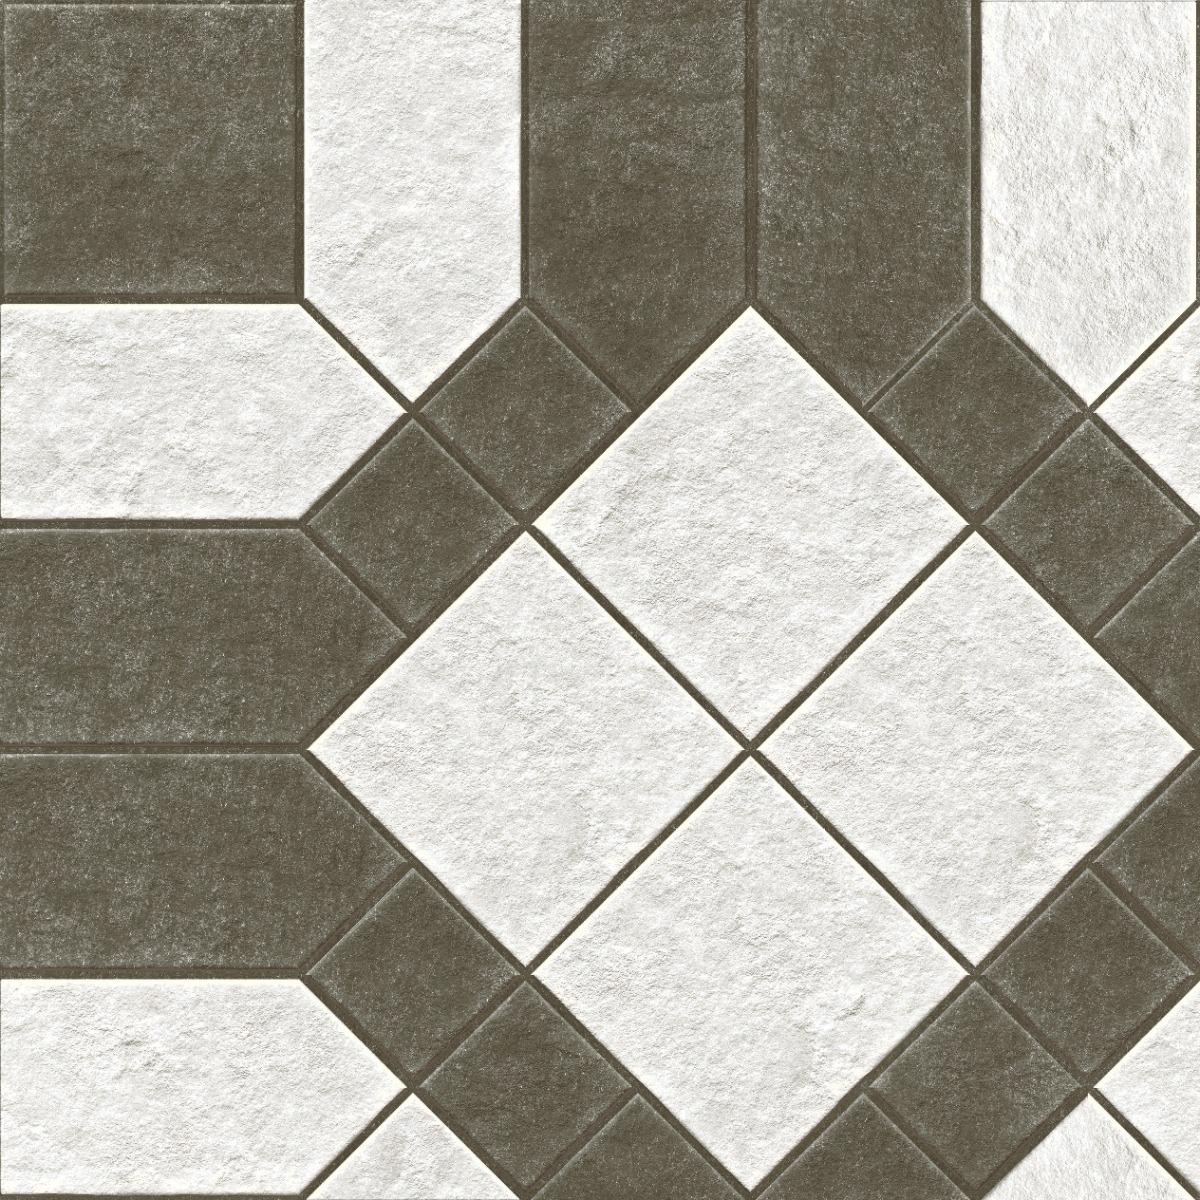 Tile Collection for Balcony Tiles, Parking Tiles, Terrace Tiles, Pathway Tiles, High Traffic Tiles, Commercial/Office, Outdoor Area